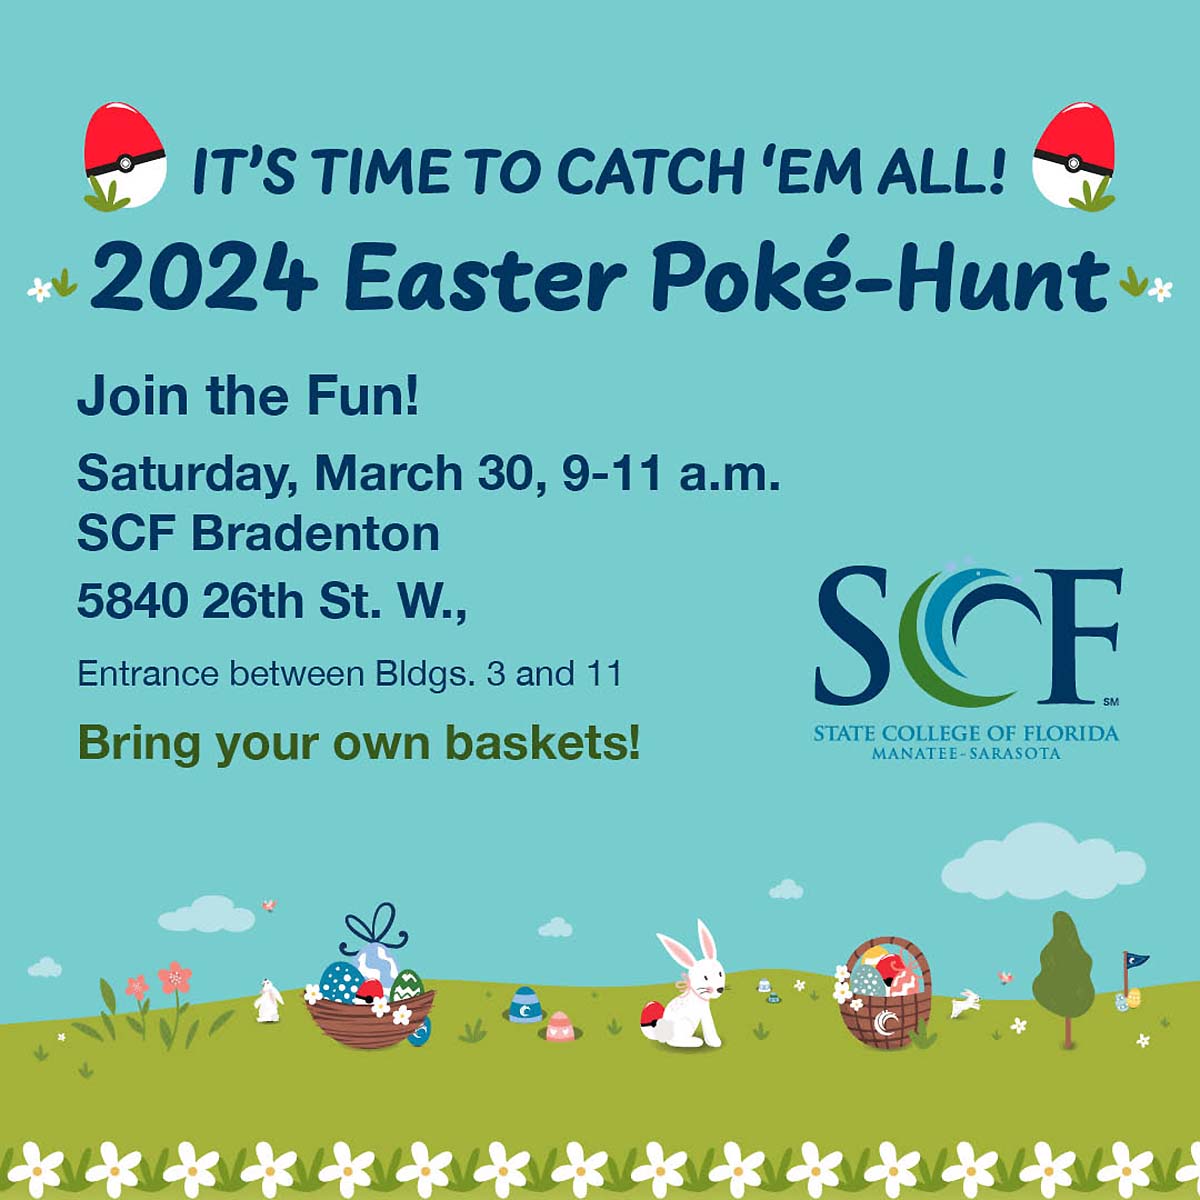 Get festive with Maverick the Manatee and join the fun @ SCF Bradenton’s Easter Egg Poké-Hunt on Sat., March 30, 9-11 a.m.!